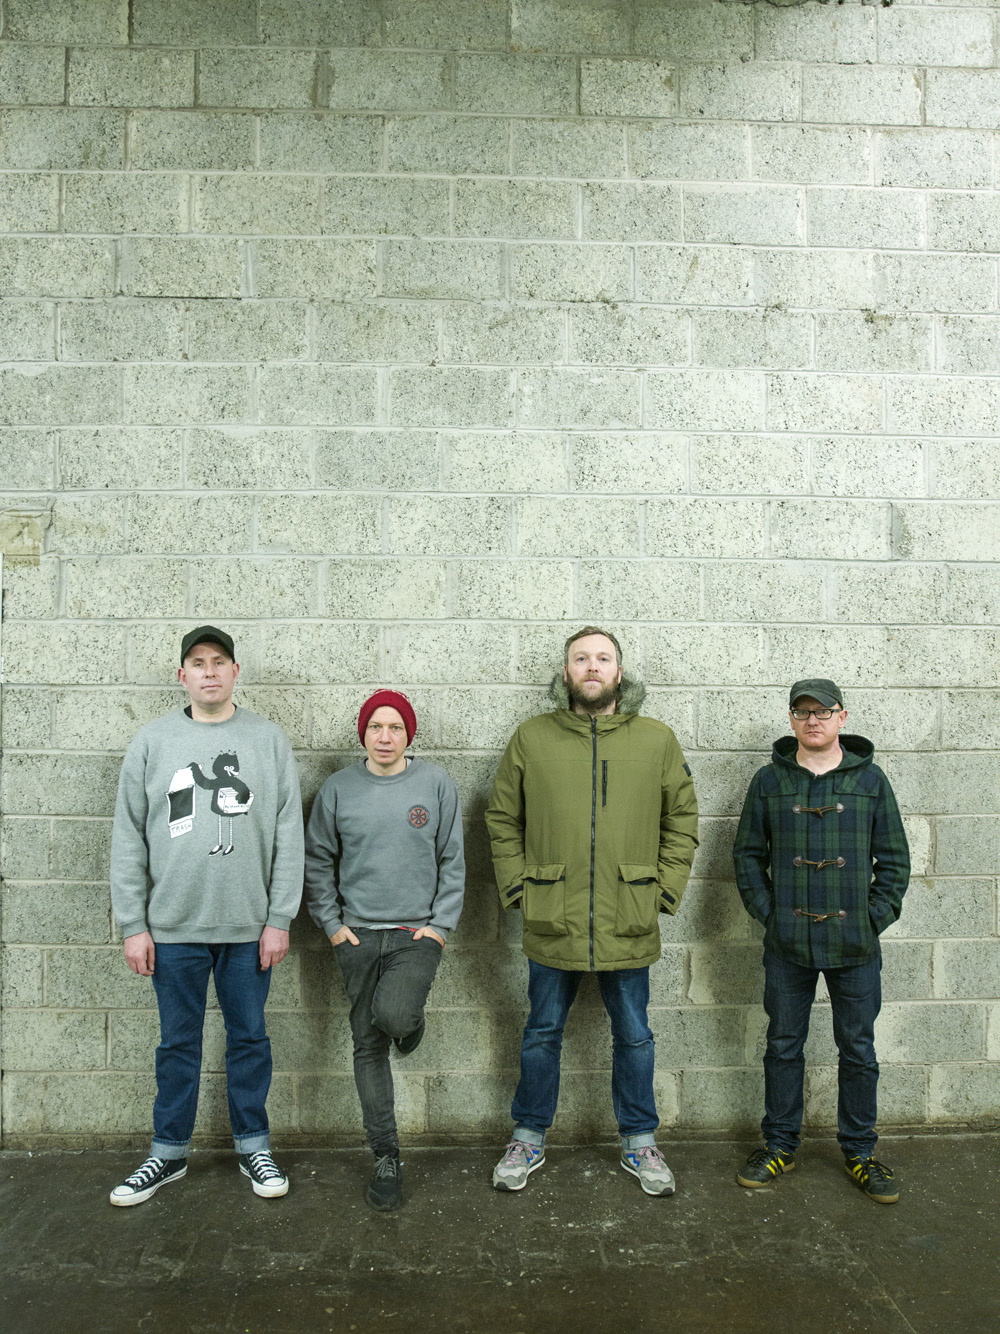 Mogwai! Bag Yourself 2 Tickets to The Concert @ Brighton Dome On Friday February 17th & See Music From Their No.1 Album!!